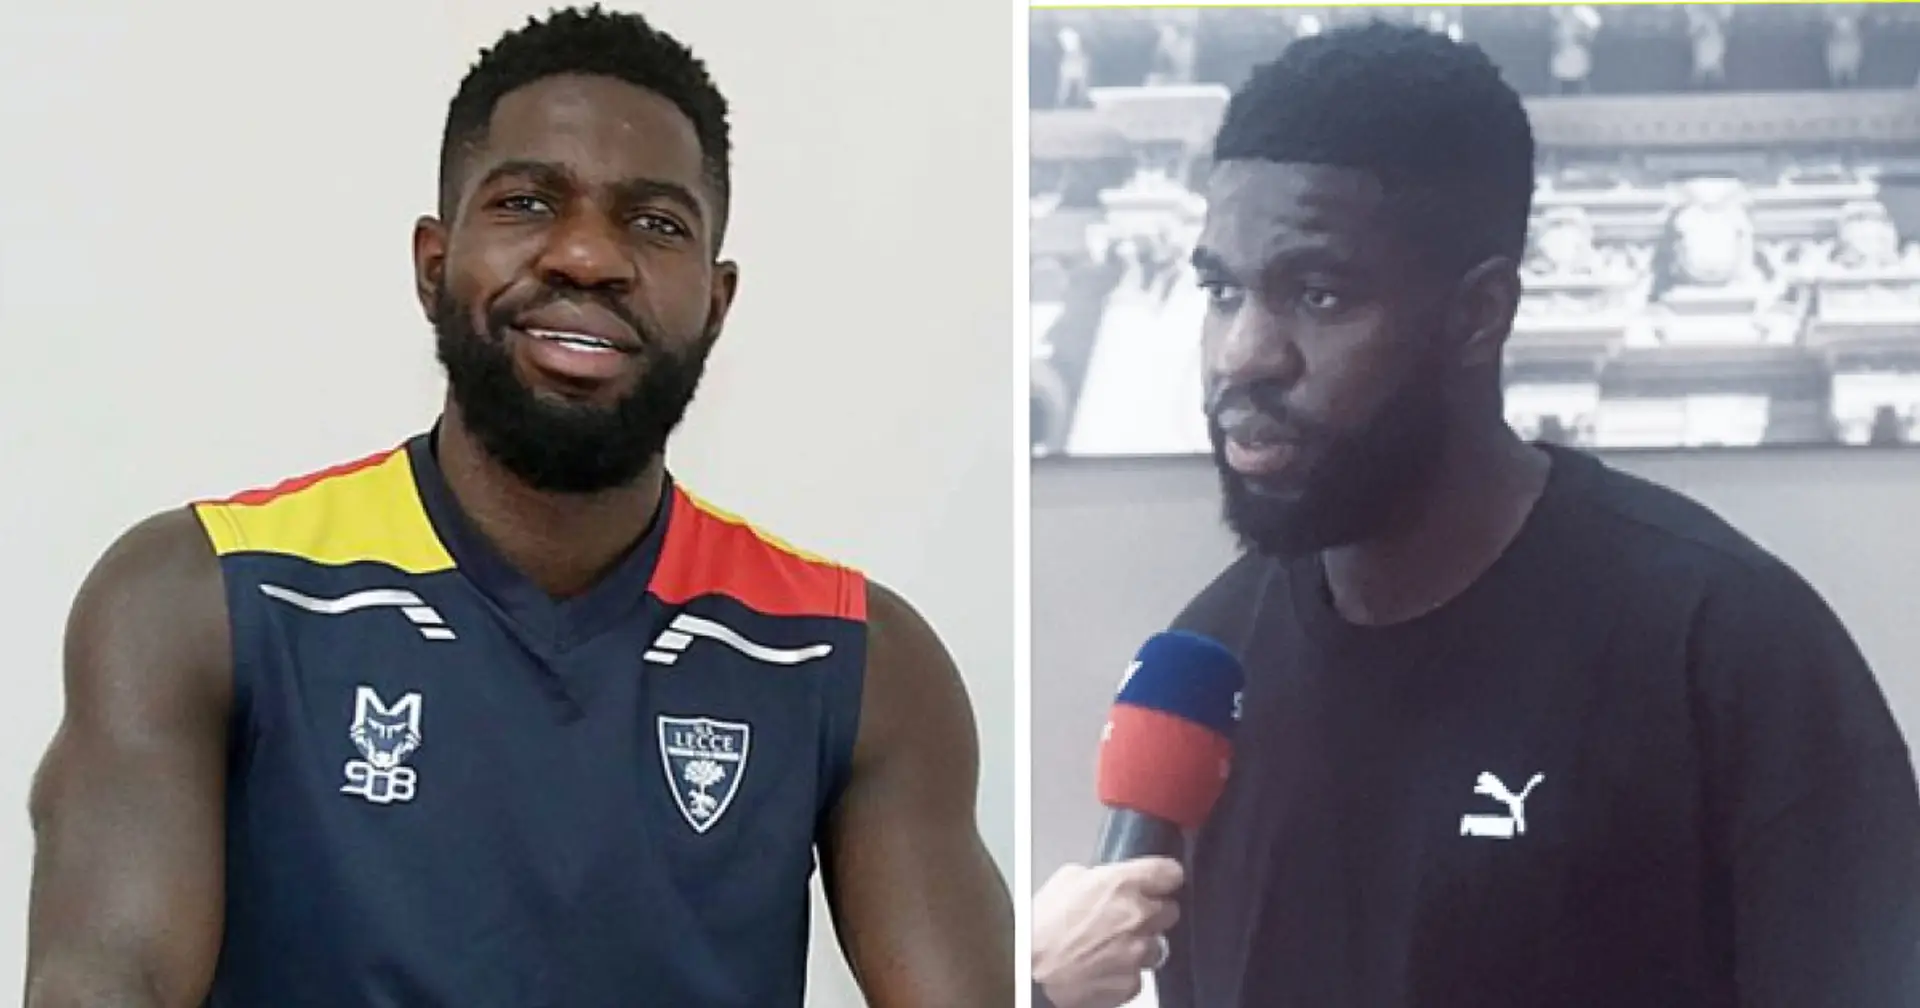 'I want to play': Umtiti breaks silence over hard times at Barca after passing Lecce medical